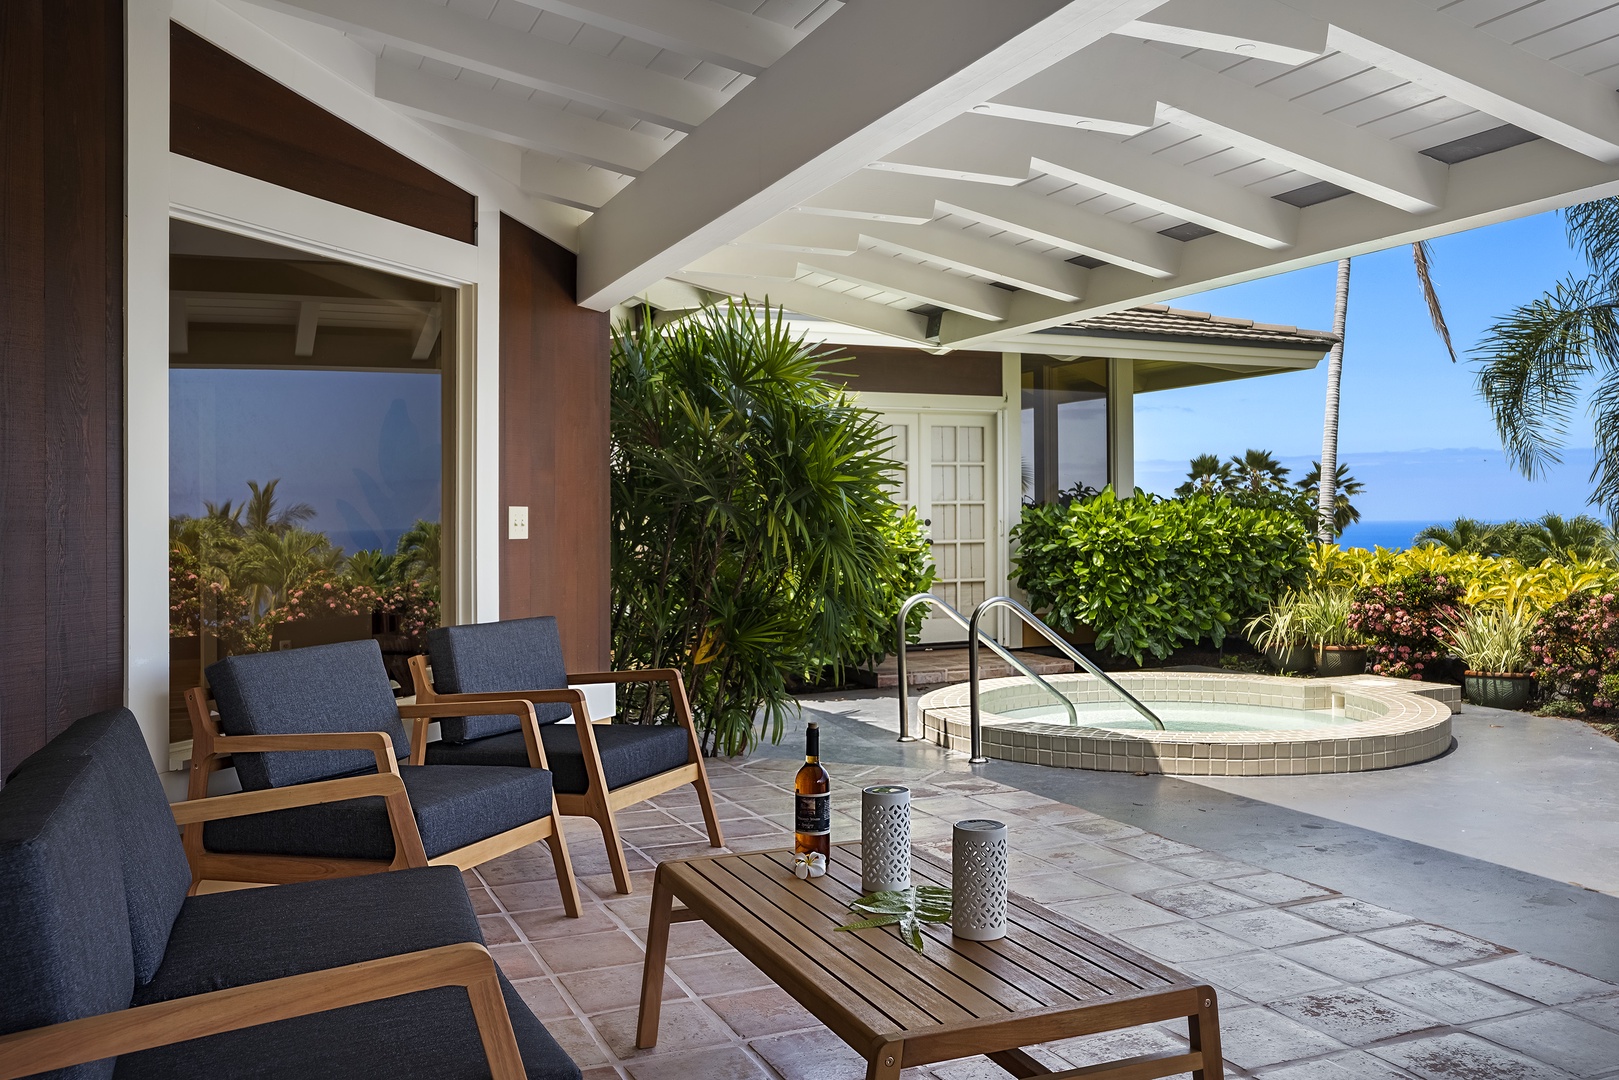 Kailua Kona Vacation Rentals, Pineapple House - Outdoor seating for 4